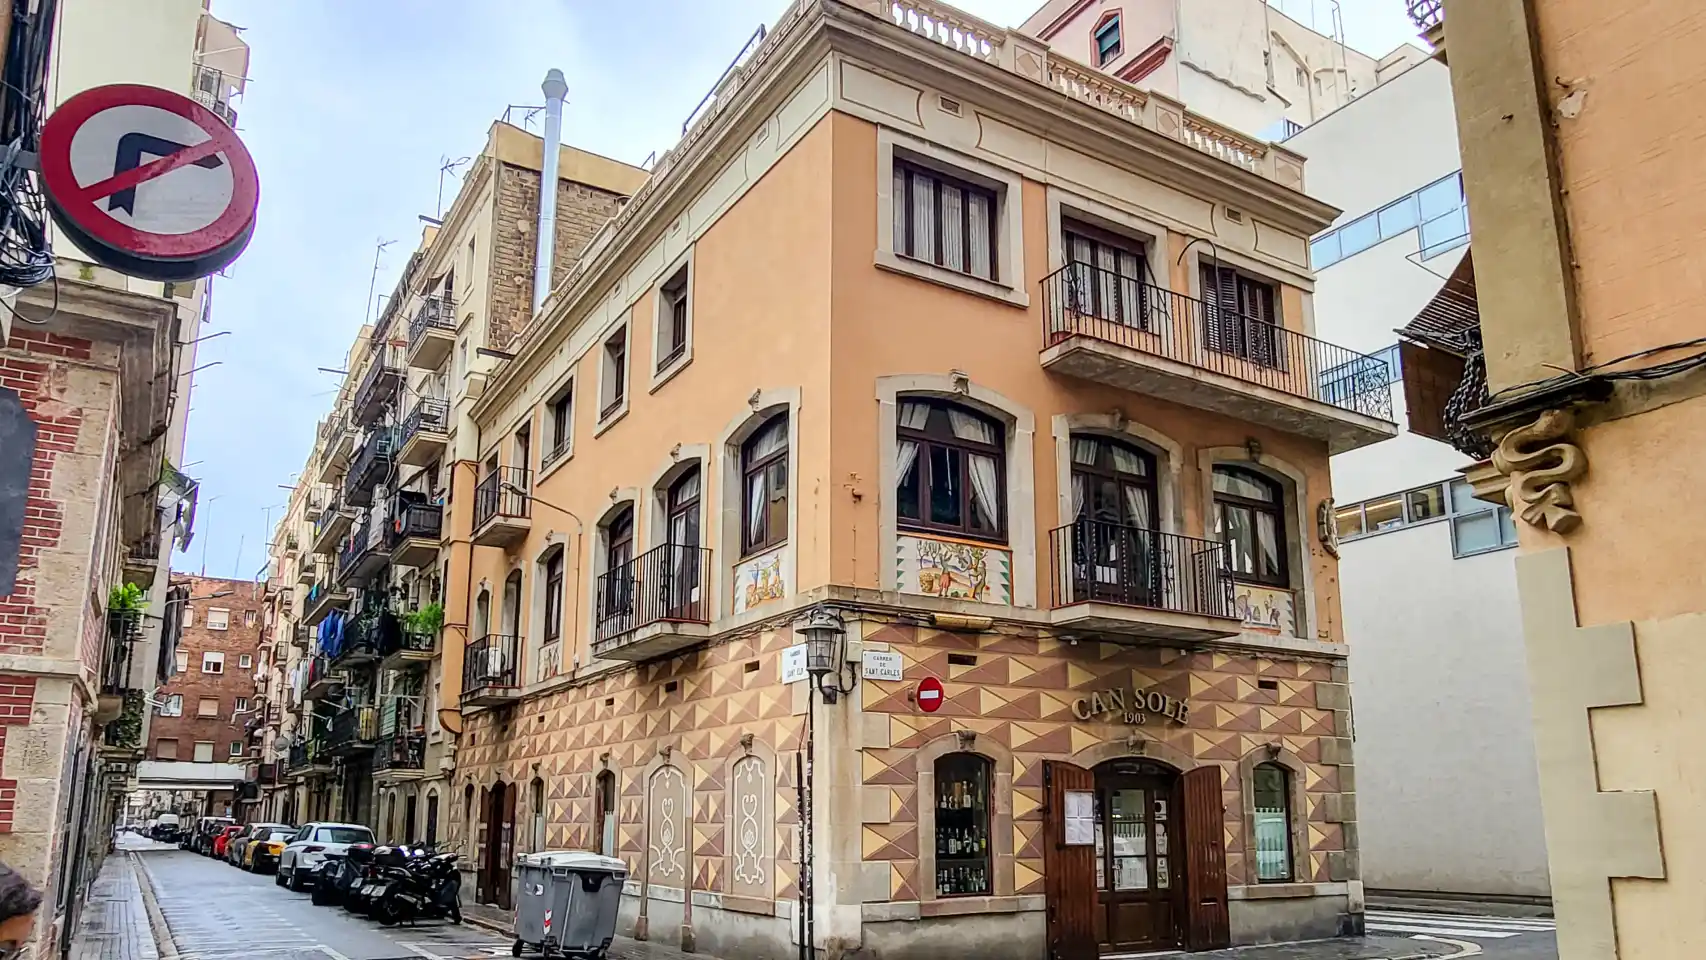 Can Solé- the oldest restaurant in the Barceloneta area